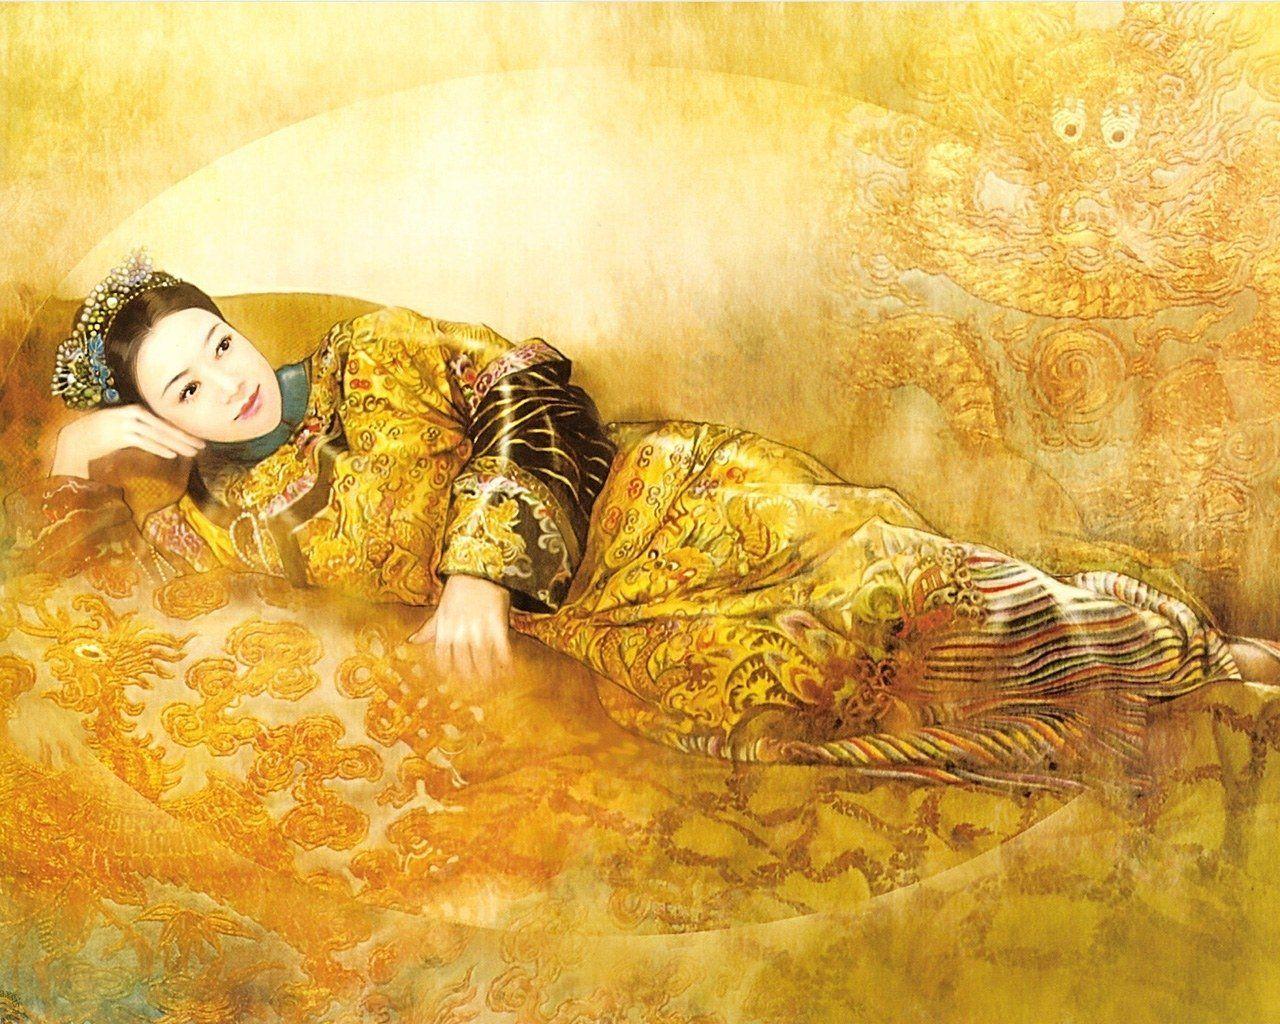 The Ancient Chinese Beauty HD Wallpaper